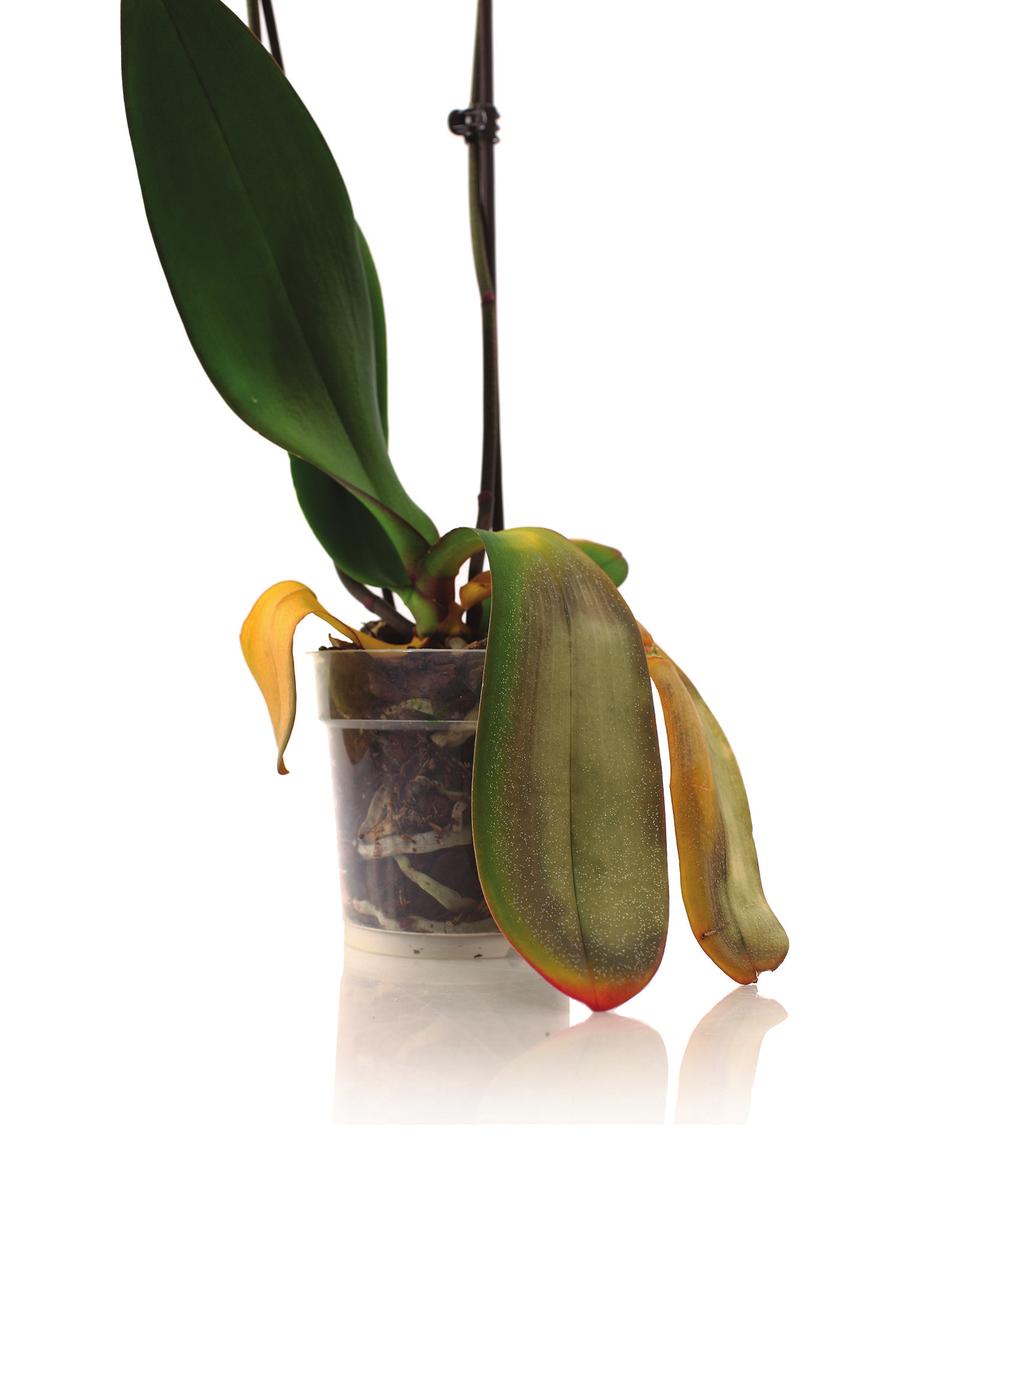 Leaves: Dark green leaves indicate that your orchid is not getting enough light. Move the plant to a brighter room, but avoid direct light.